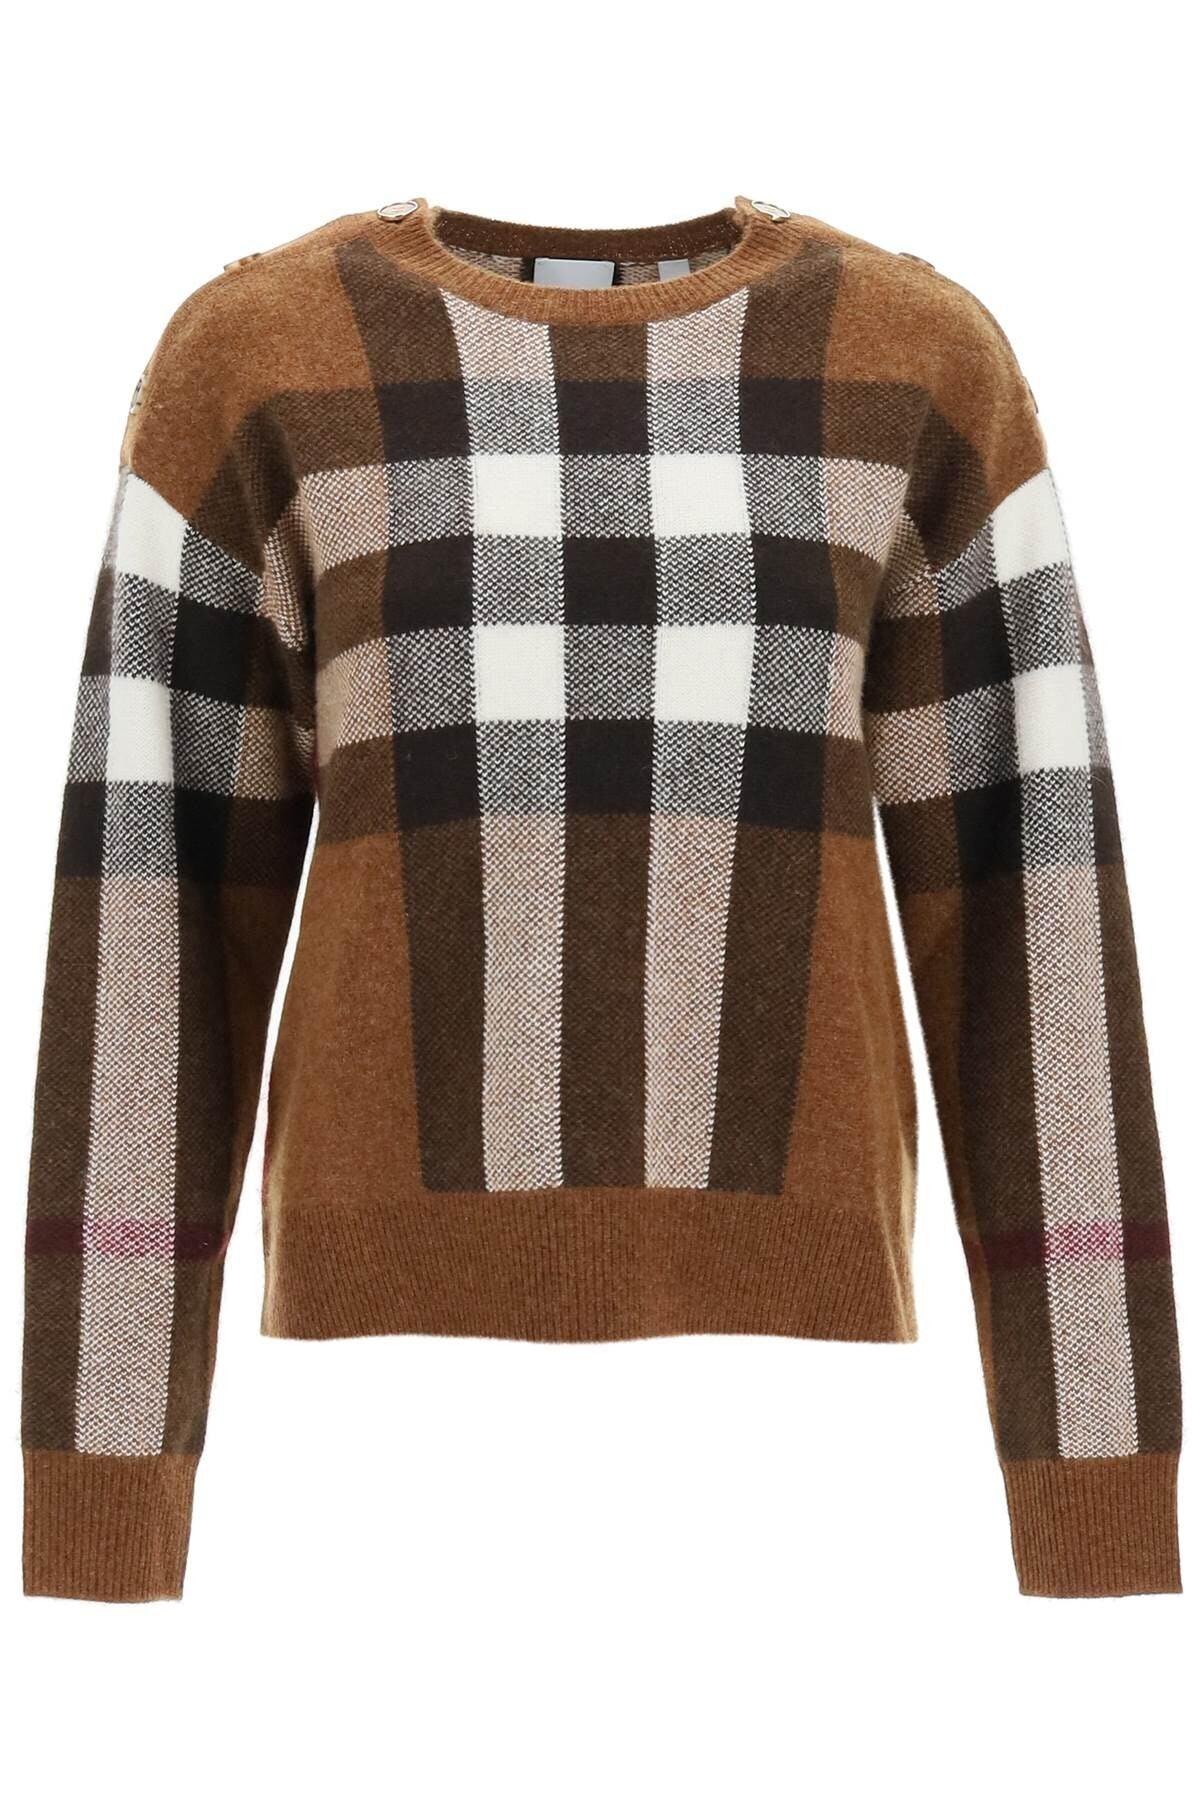 Burberry 'darla' exaggerated Check Sweater In Wool And Cashmere in Brown |  Lyst